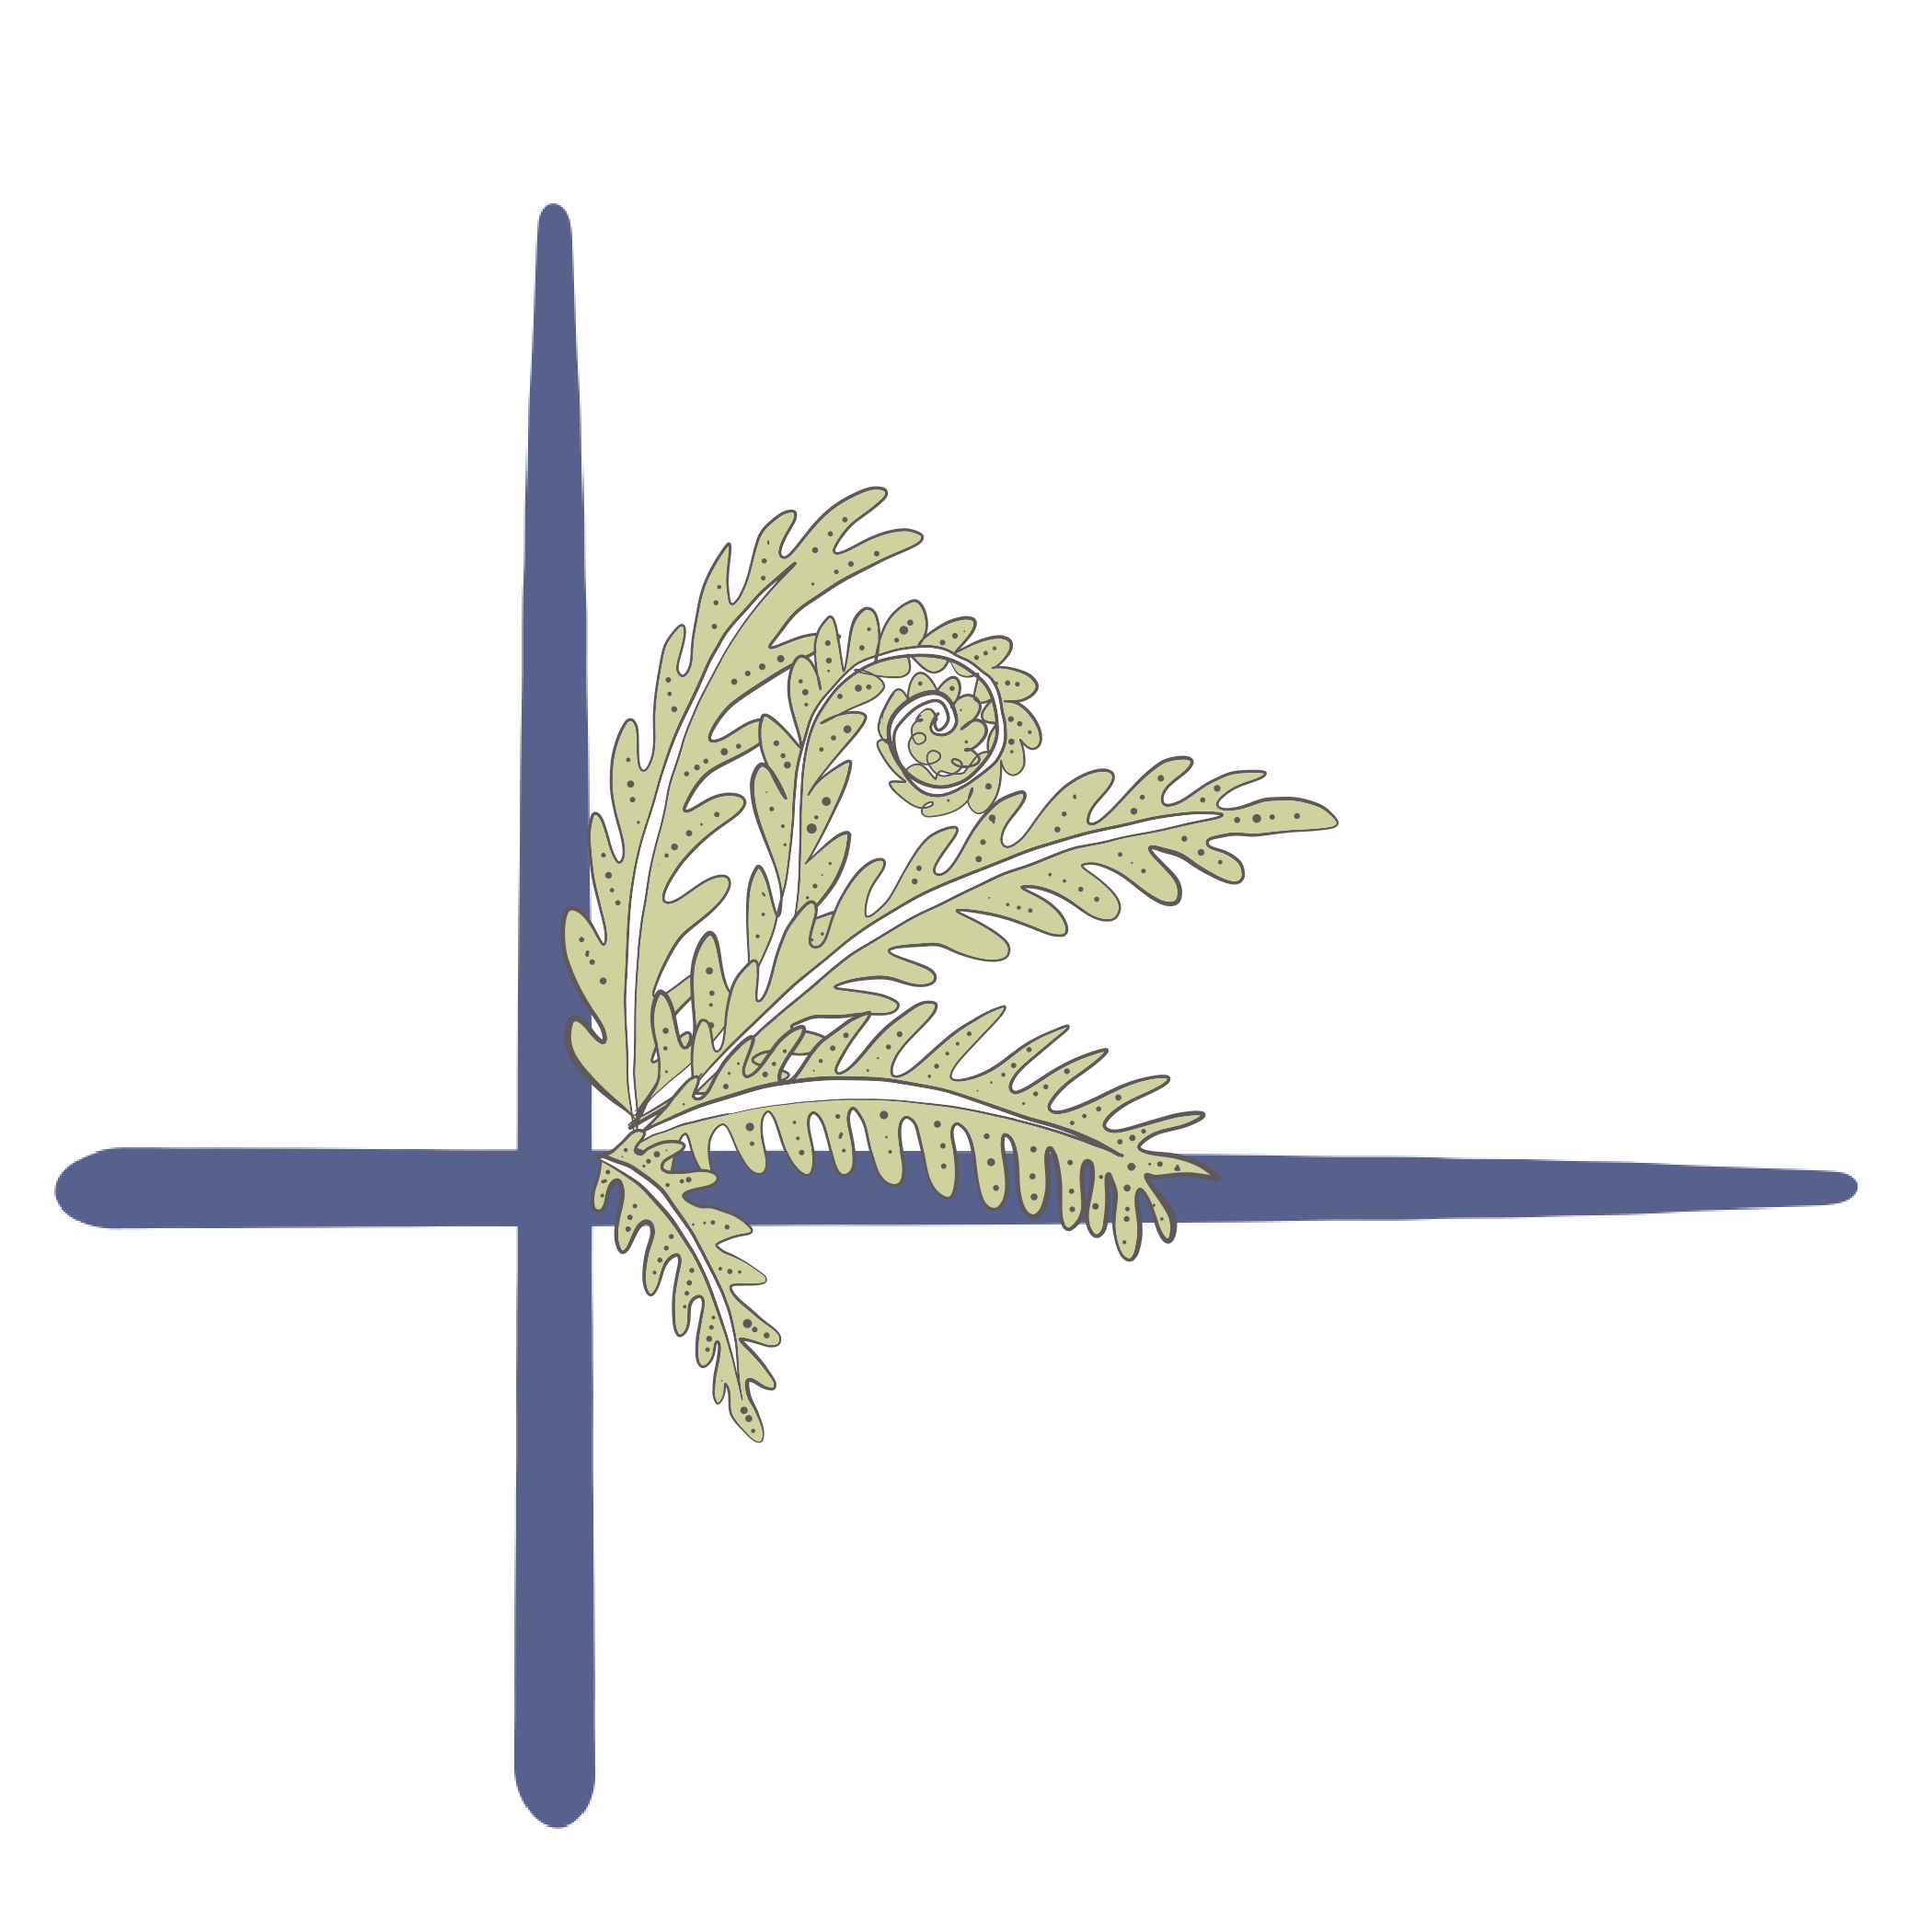 An illustration of a fern perched on the Hearth Place logo